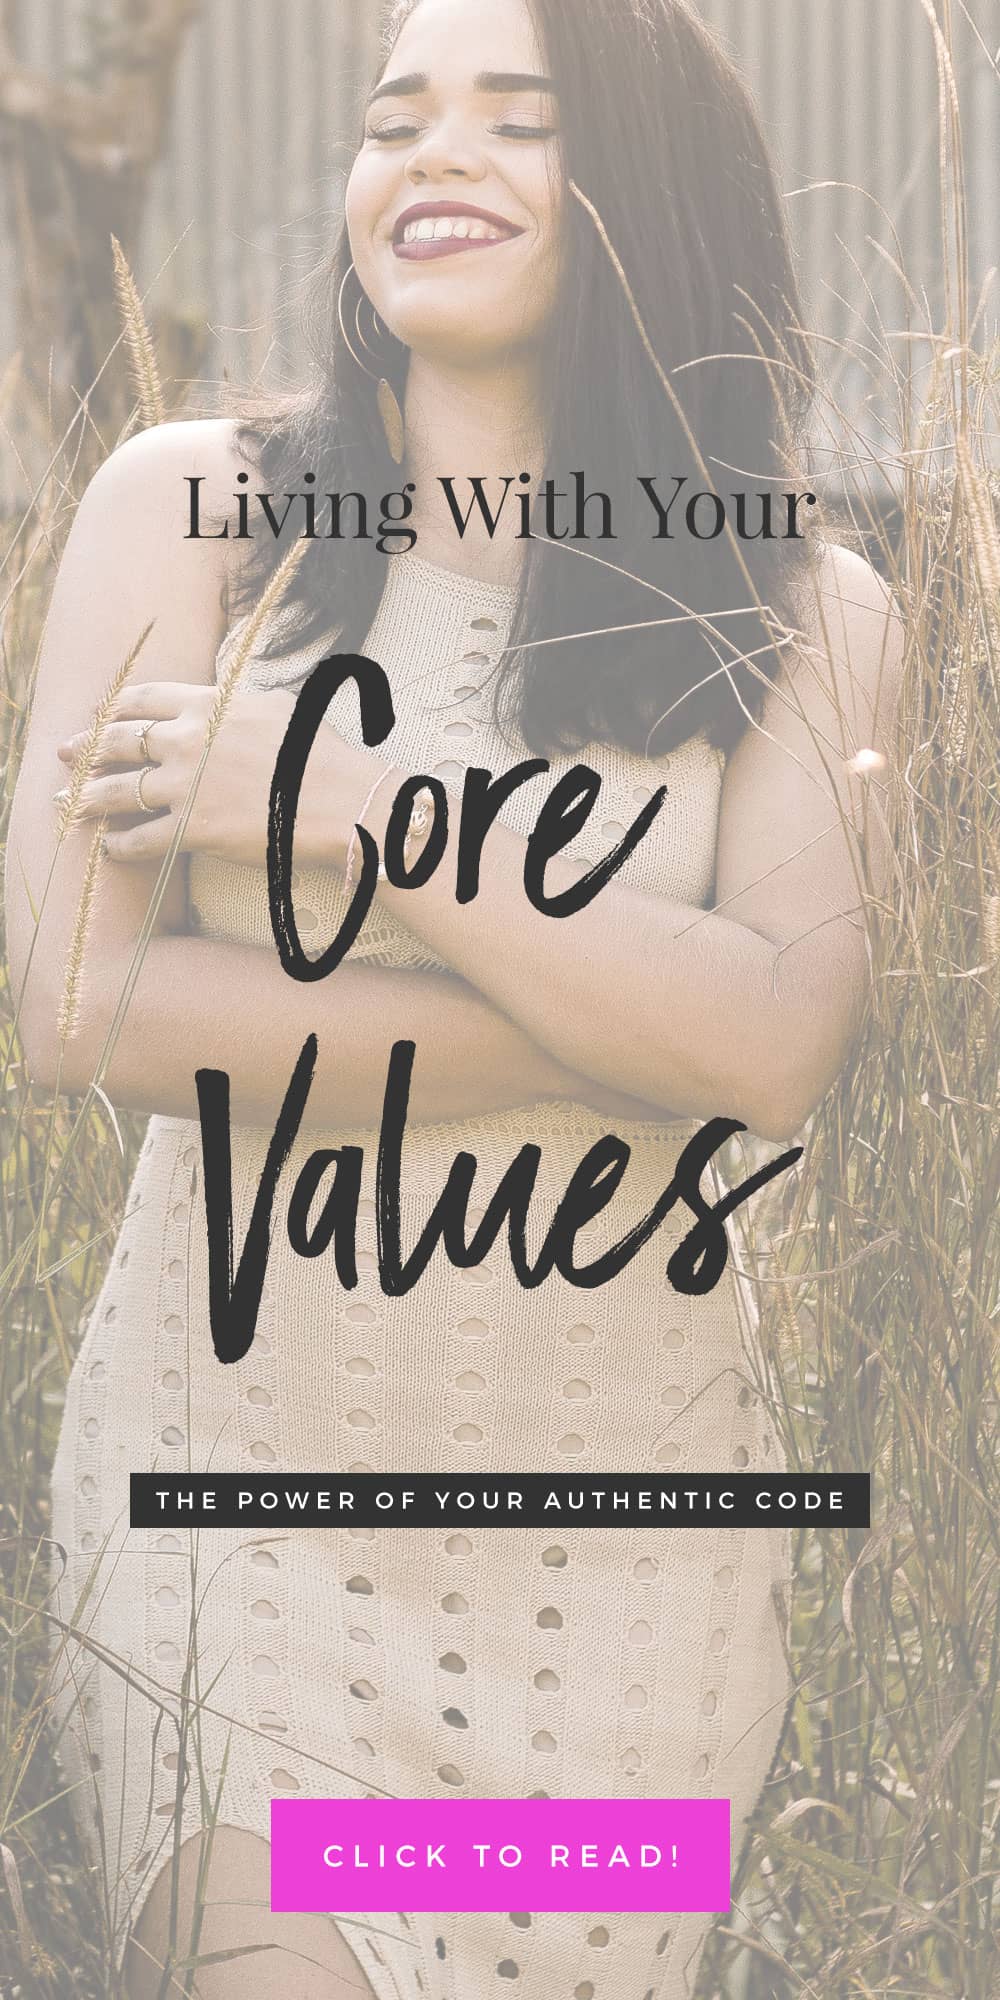 Living From Your Core Values: The Power Of Your Authentic Code